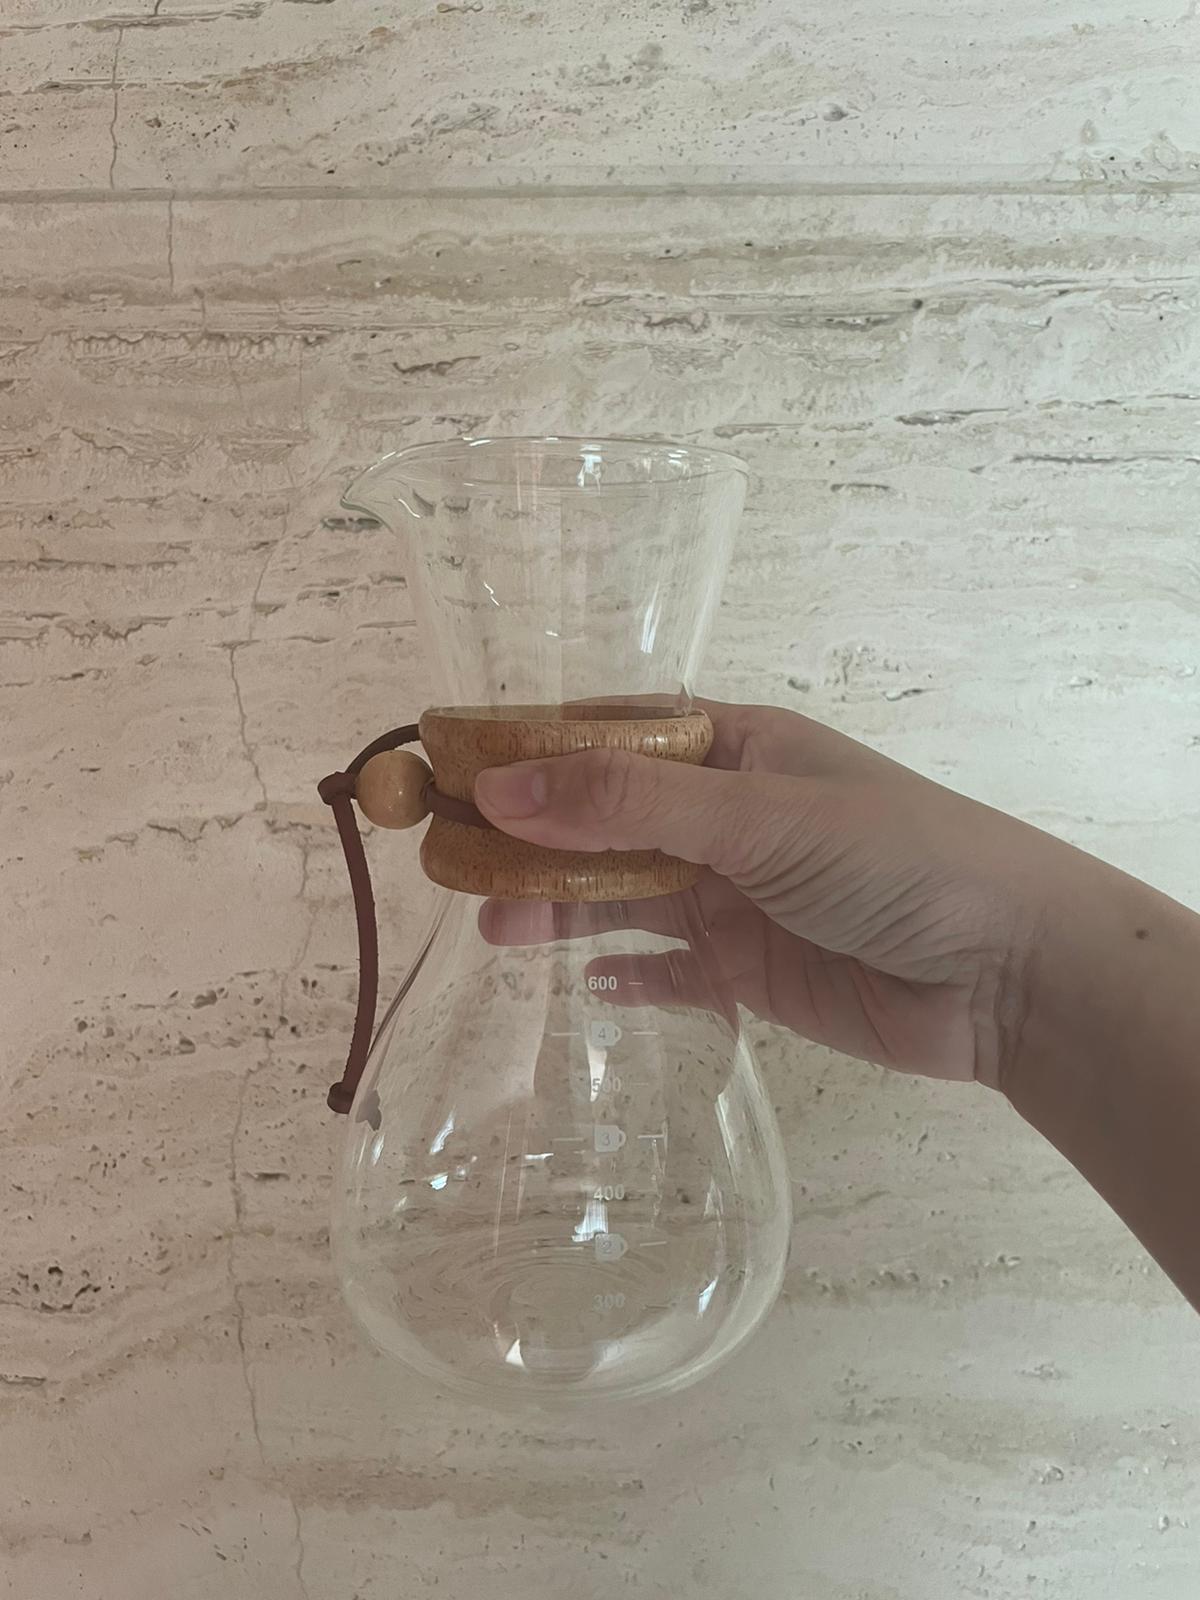 Glass Coffee Drip Pot by PROSE Tabletop